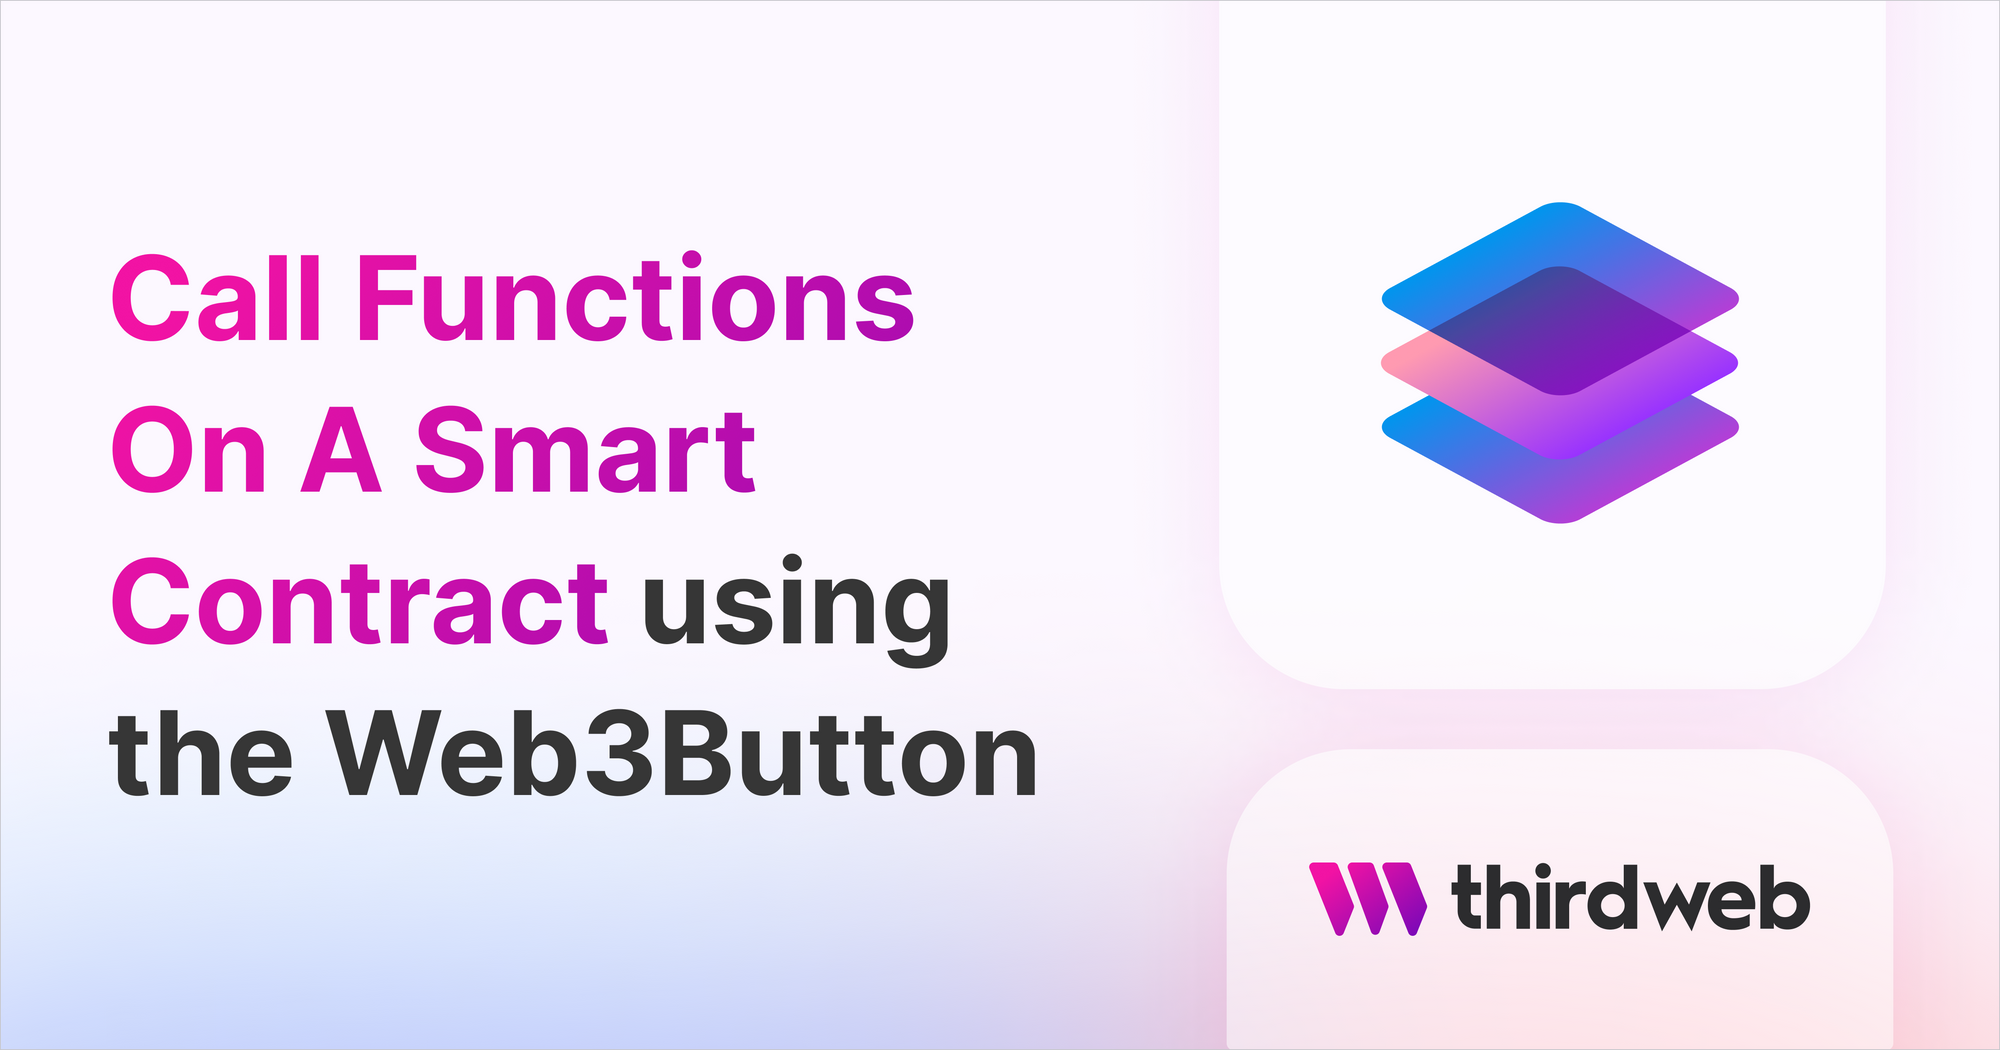 How to Call Functions on a Smart Contract Using the Web3Button